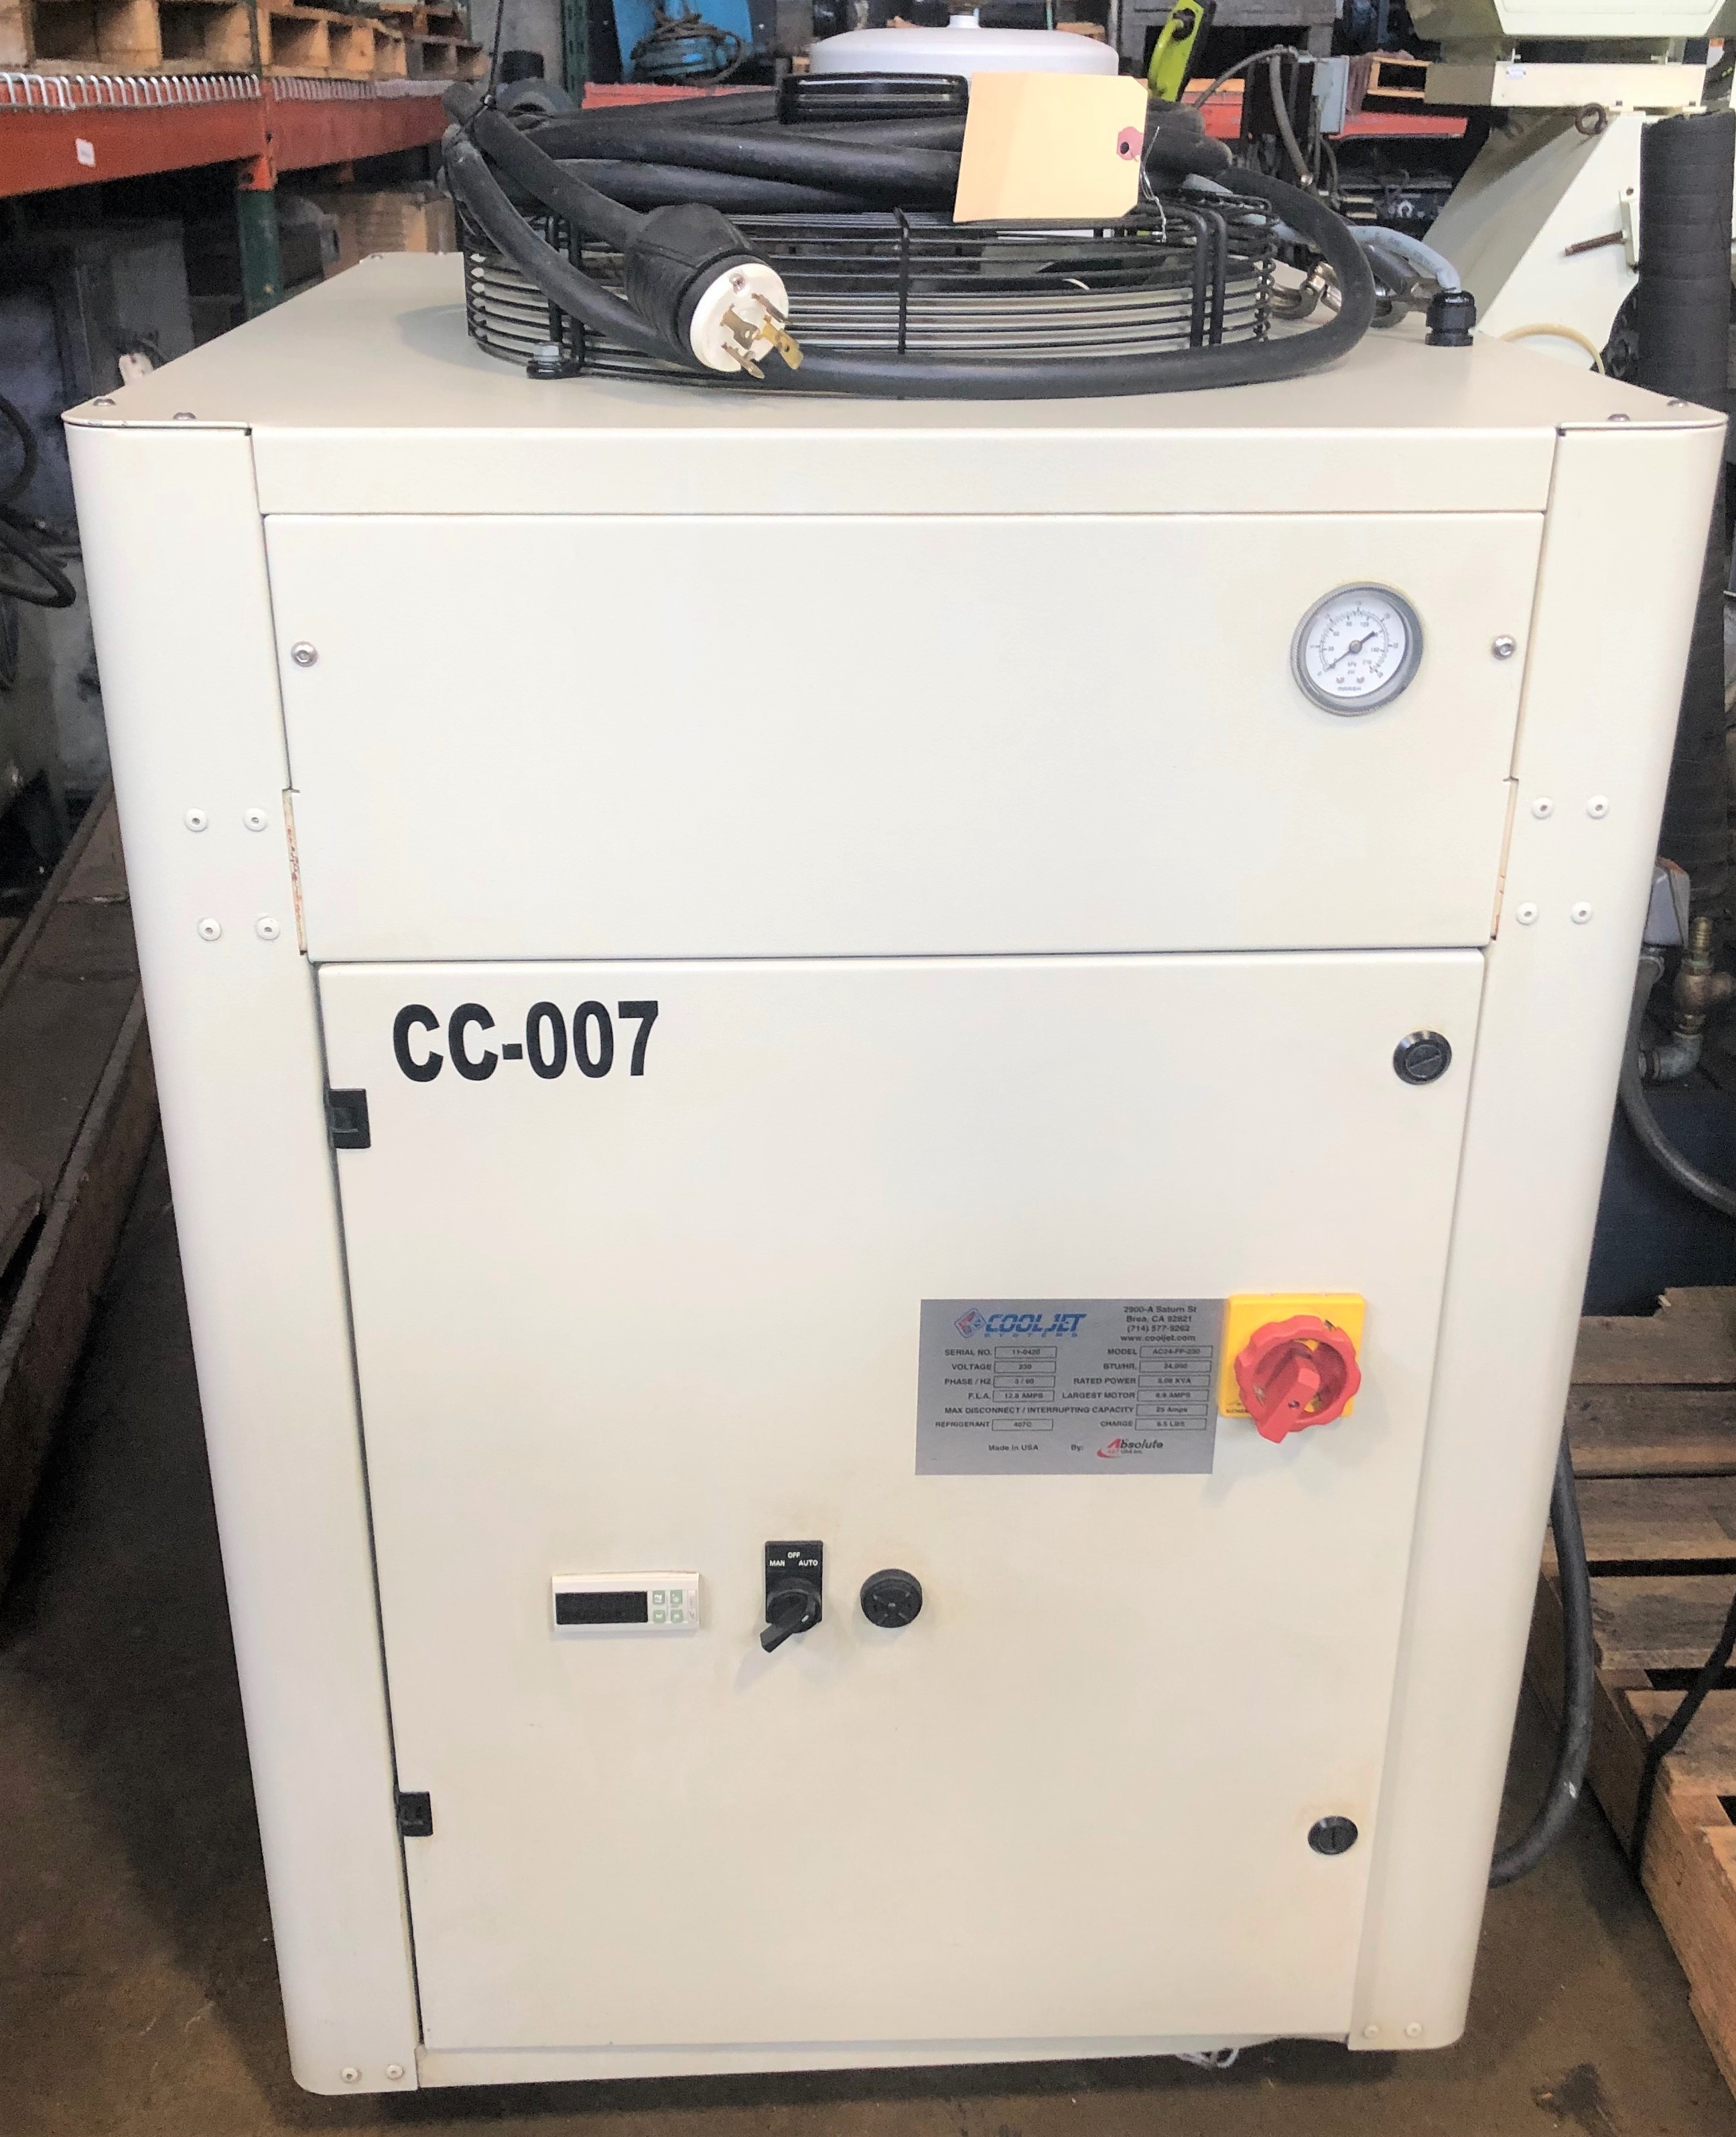 Cool Jet Systems AC24-FP-230 Coolant Chiller, CoolJet Systems 24,000 BTU Coolant Chiller, Like New Coolant Chiller For Sale, 24,000 BTU Coolant Chiller For Sale